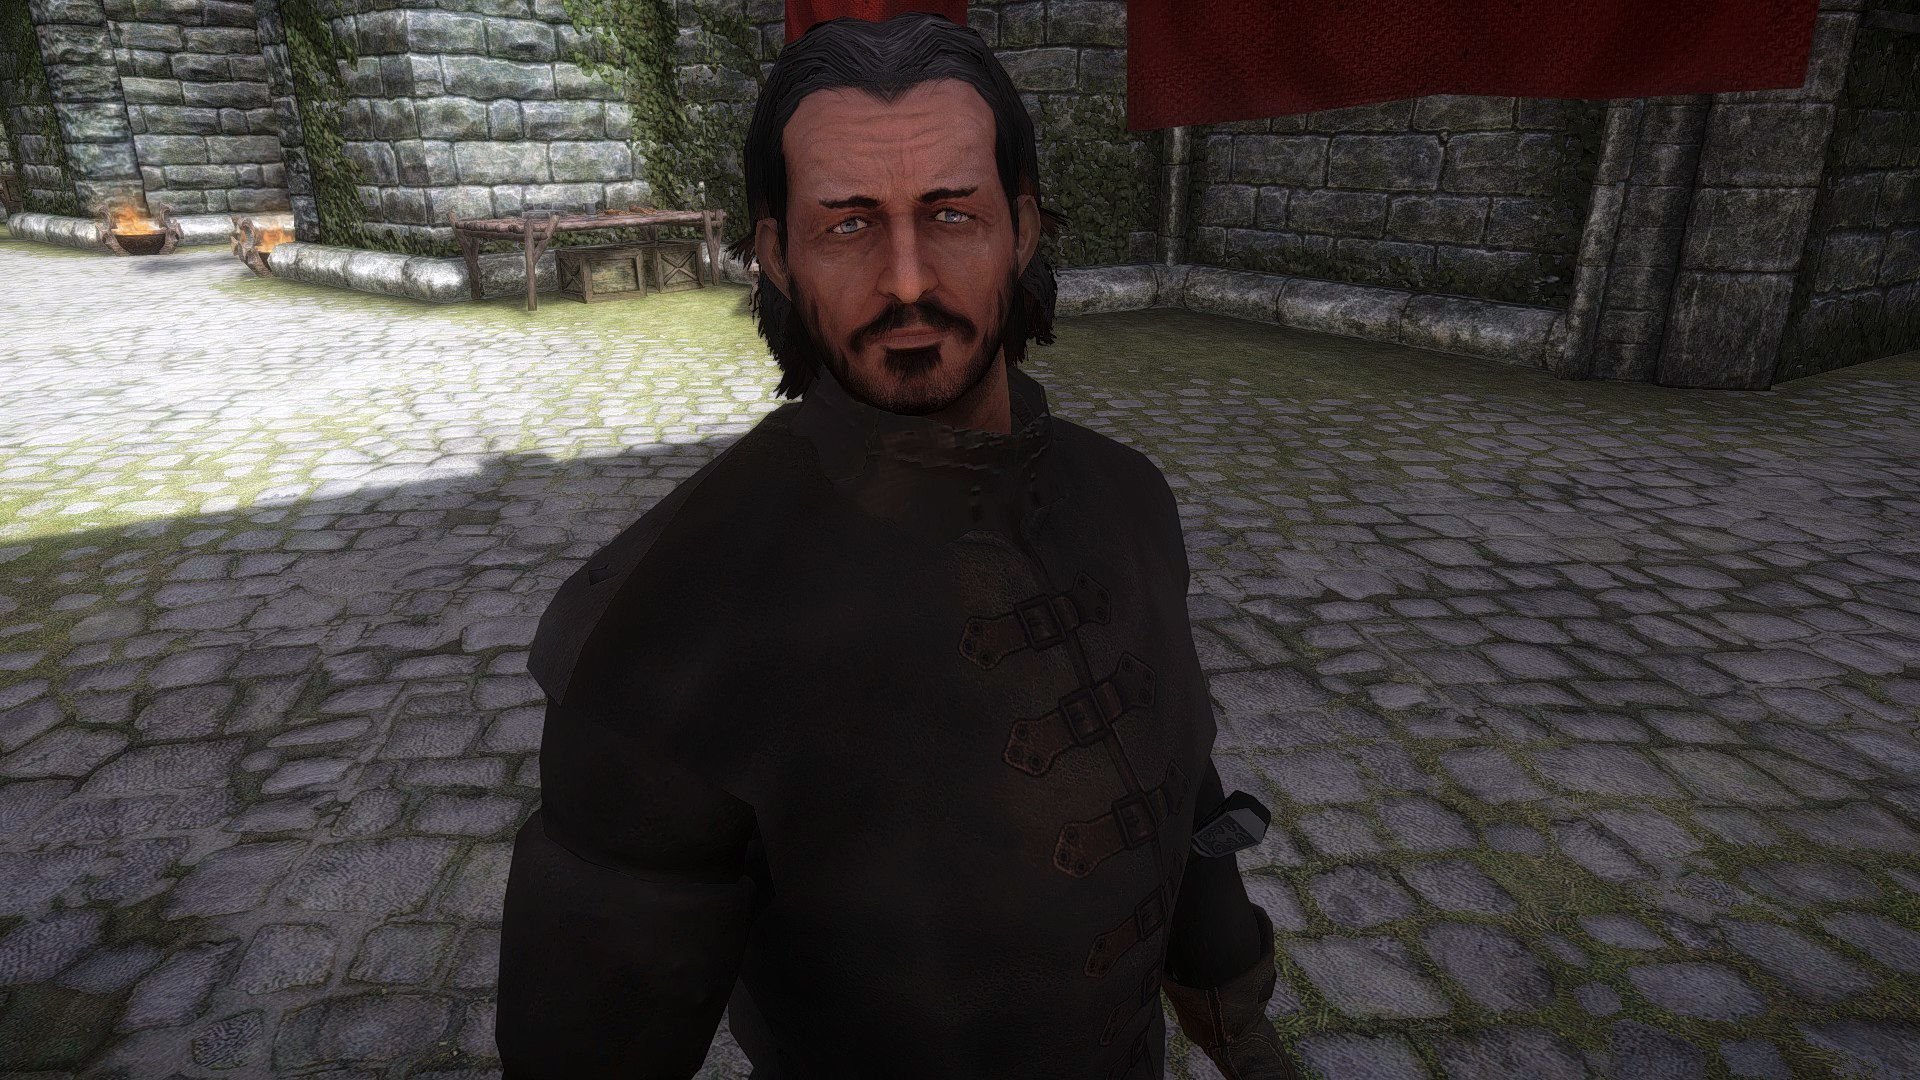 Sir Bronn of the Fookin Blackwater Follower from HBO Game of Thrones at Skyrim Nexus and community